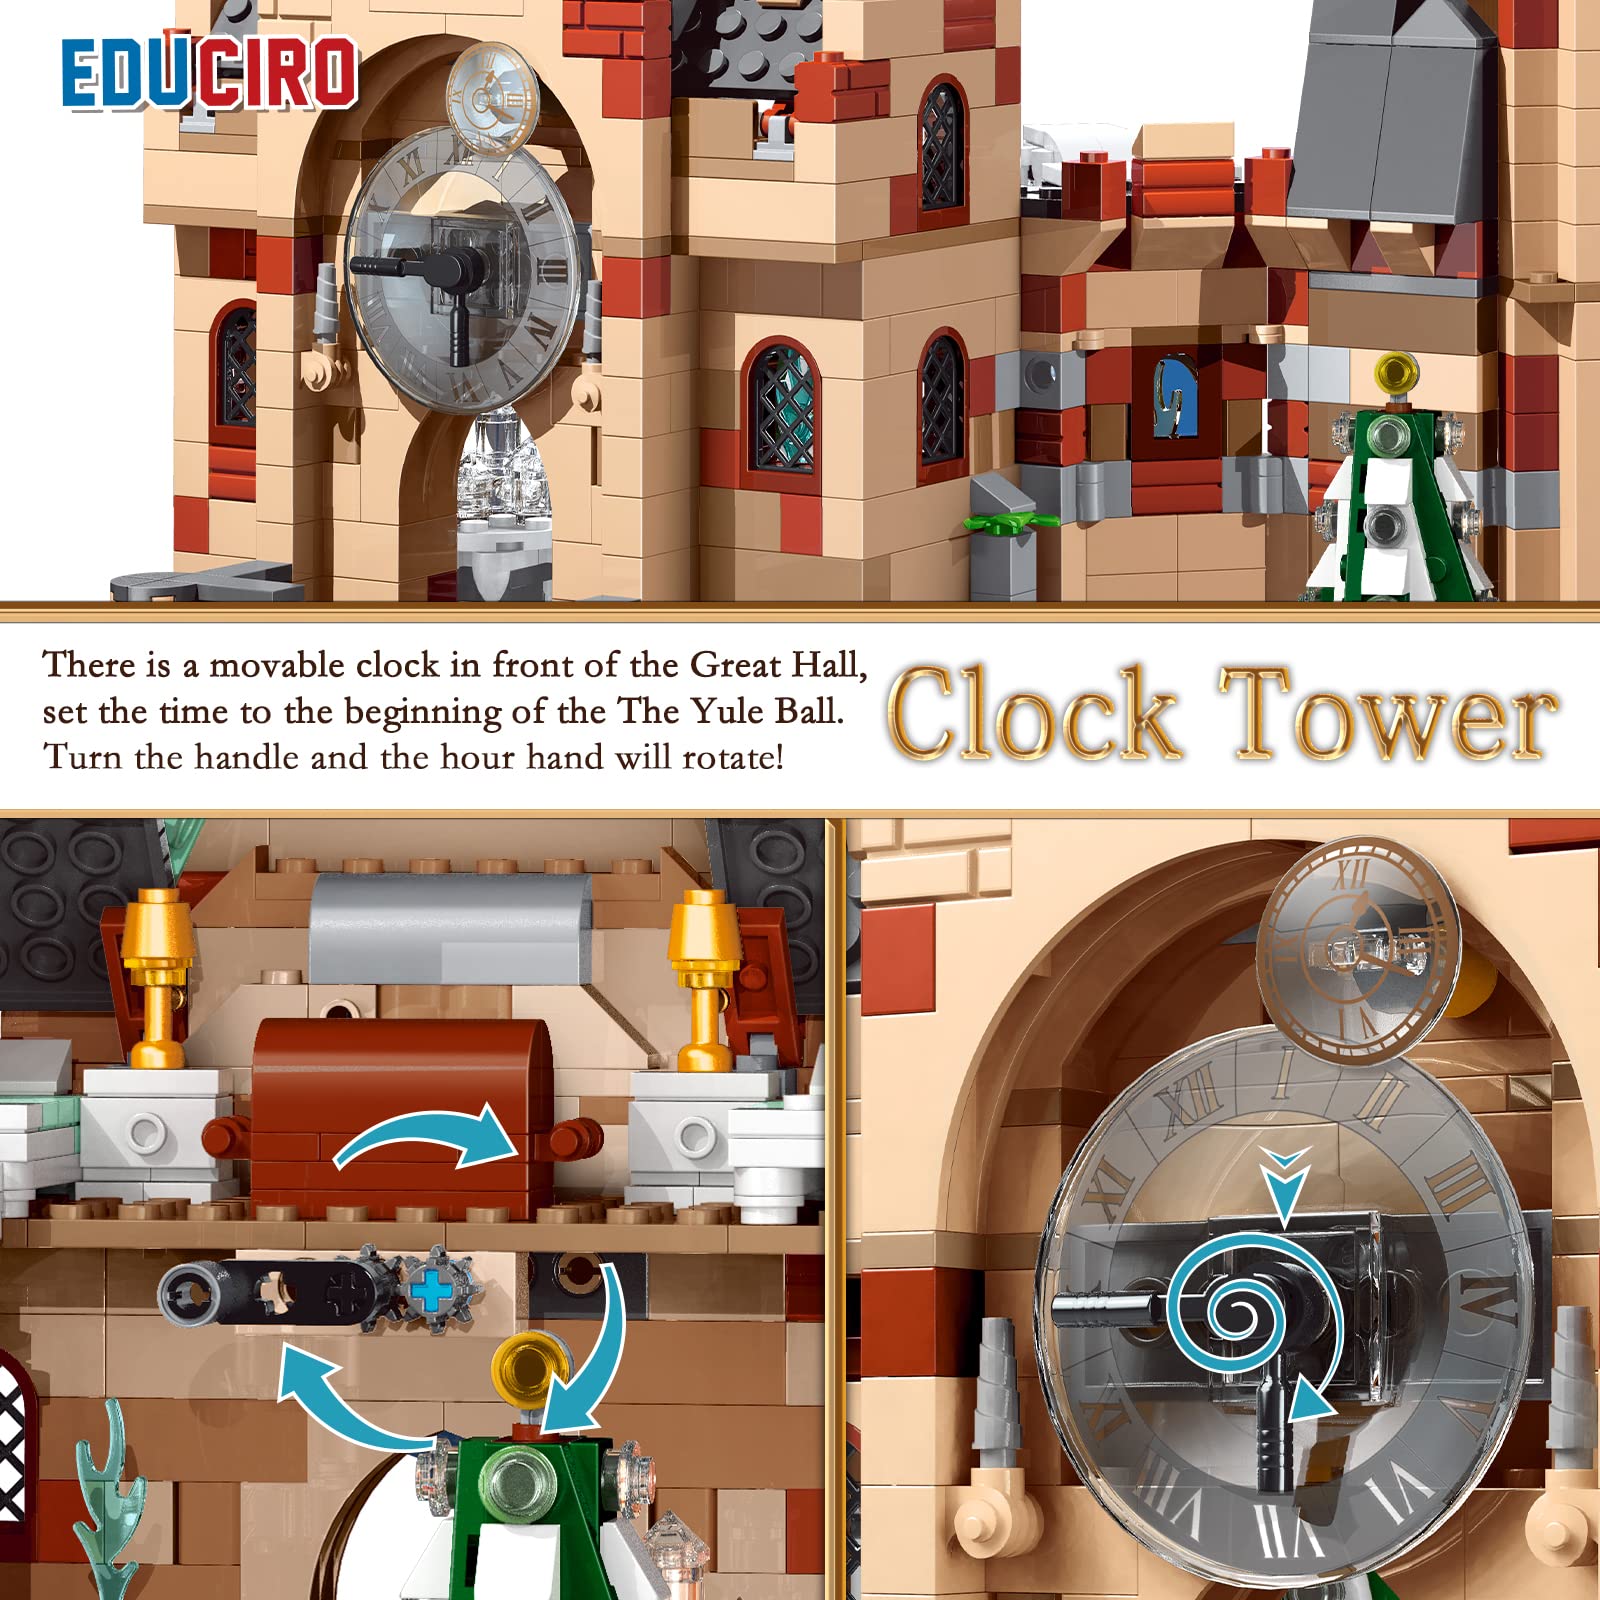 Educiro Harry Clock Tower and Great Hall Castle (871 Pieces), Build and Play Dumbledore Office Building Toy Set for Kids, Boys, Girls Ages 8-14, Not Lego Harry Potter